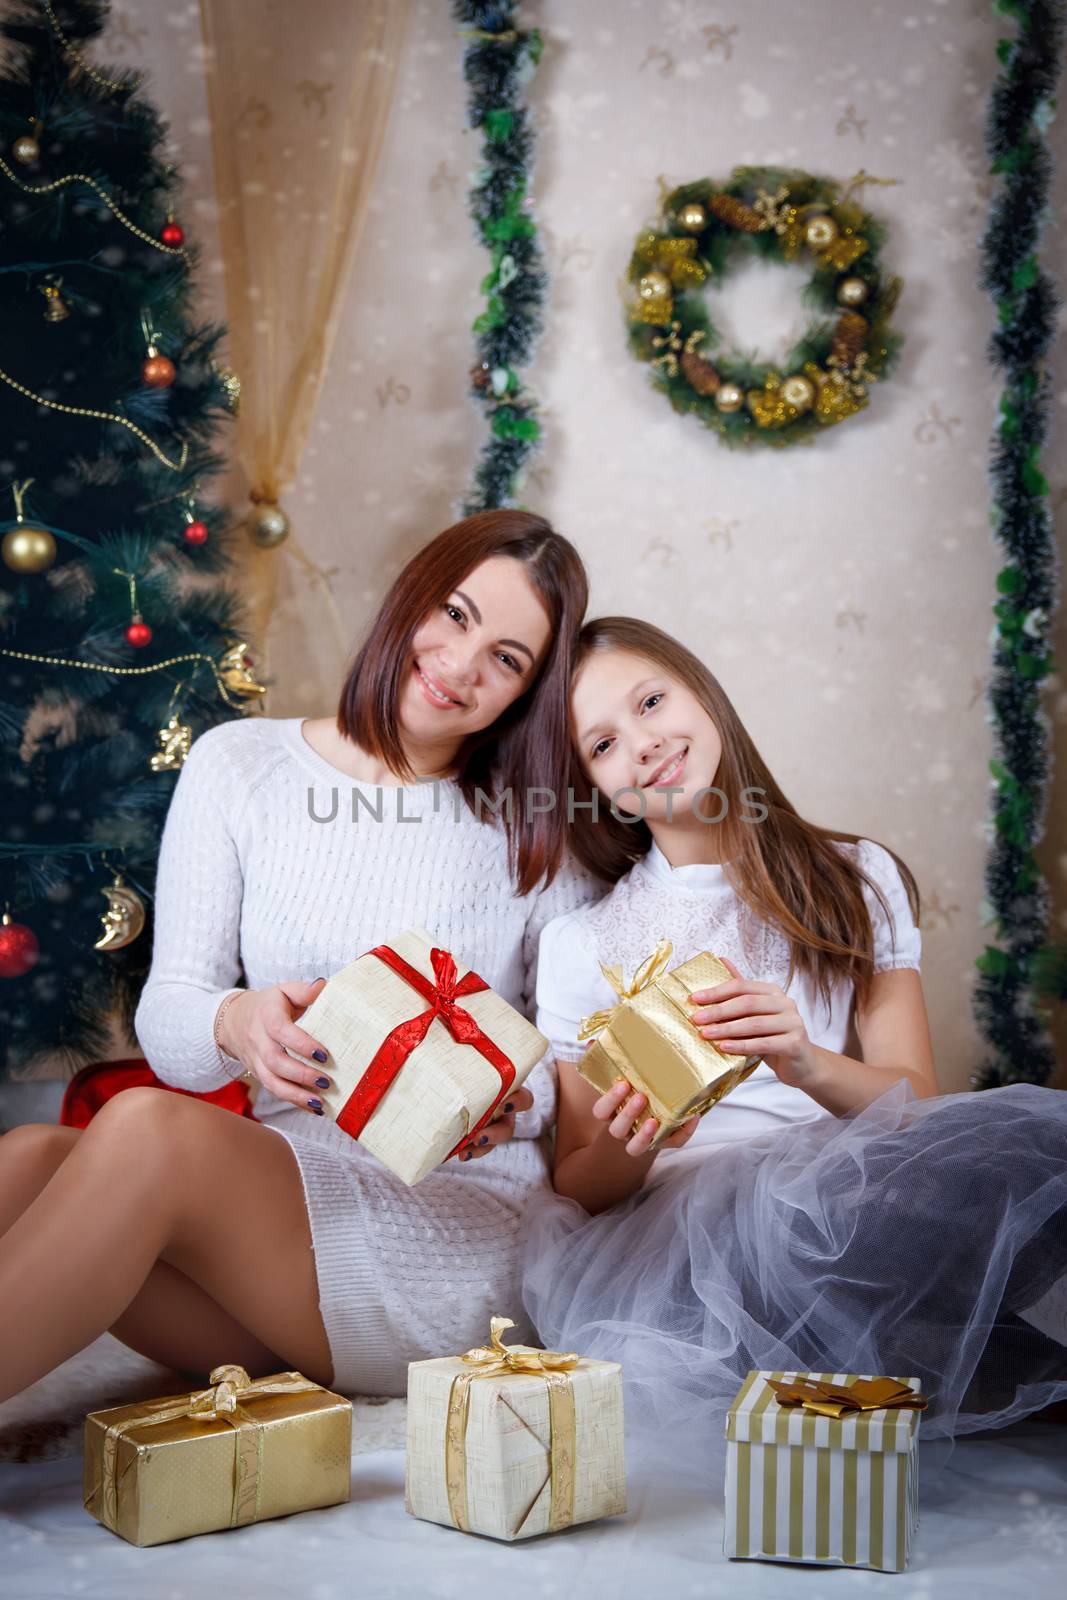 Daughter and mother holding Christmas gifts by Angel_a